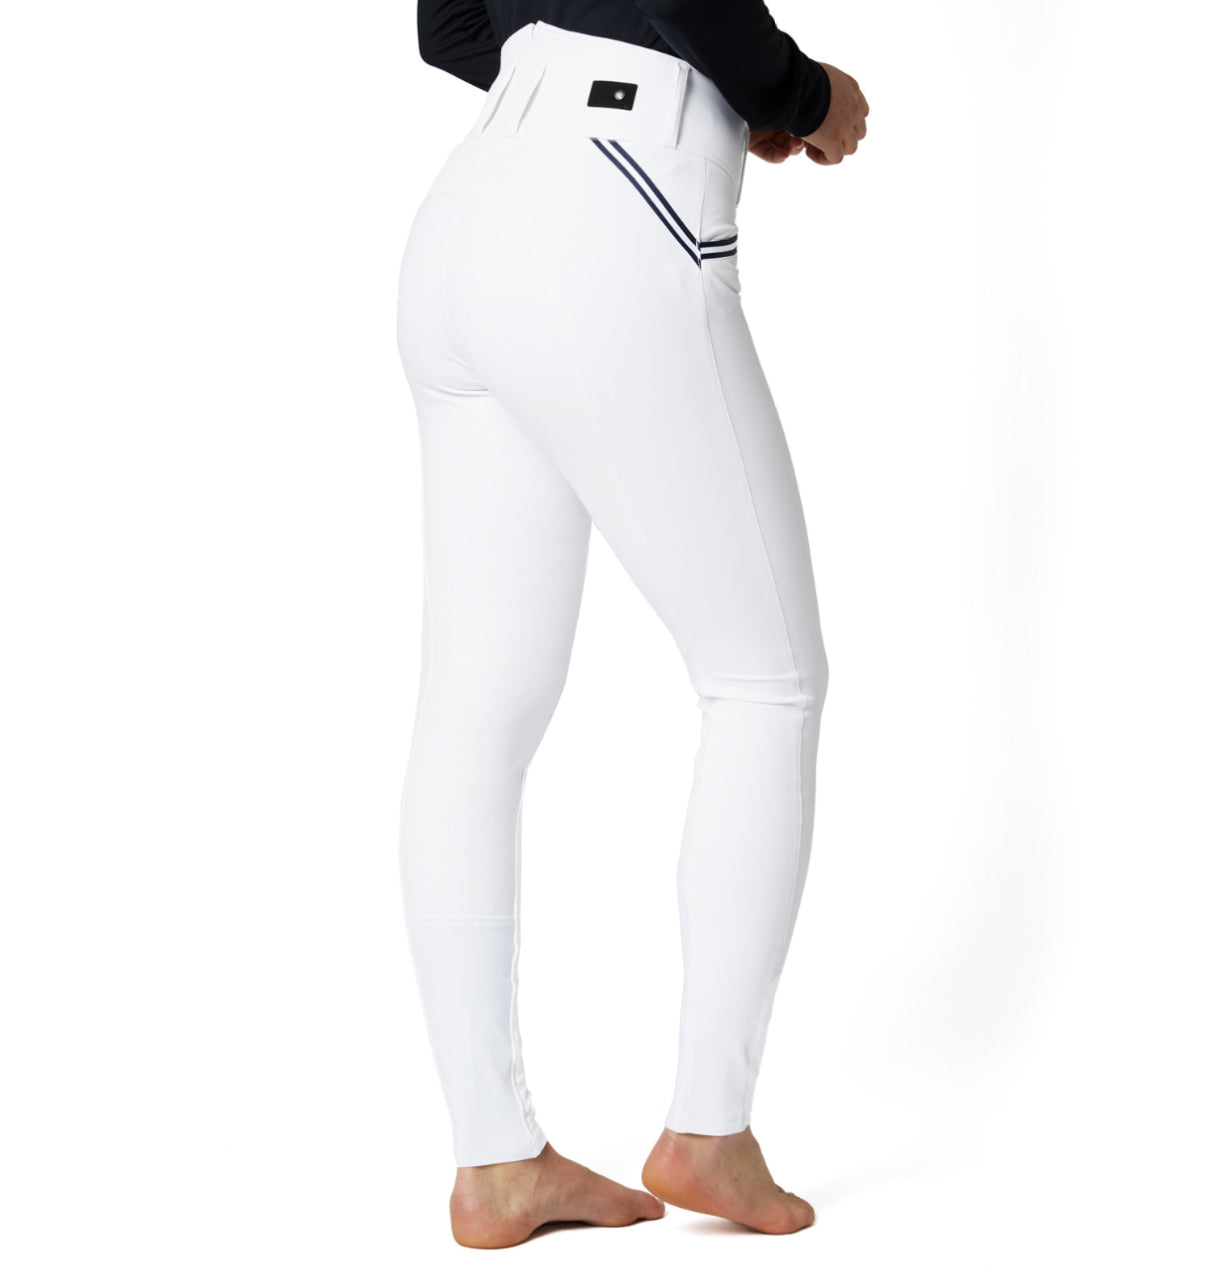 Horze Della Woman’s High Waisted Full Seat Breeches